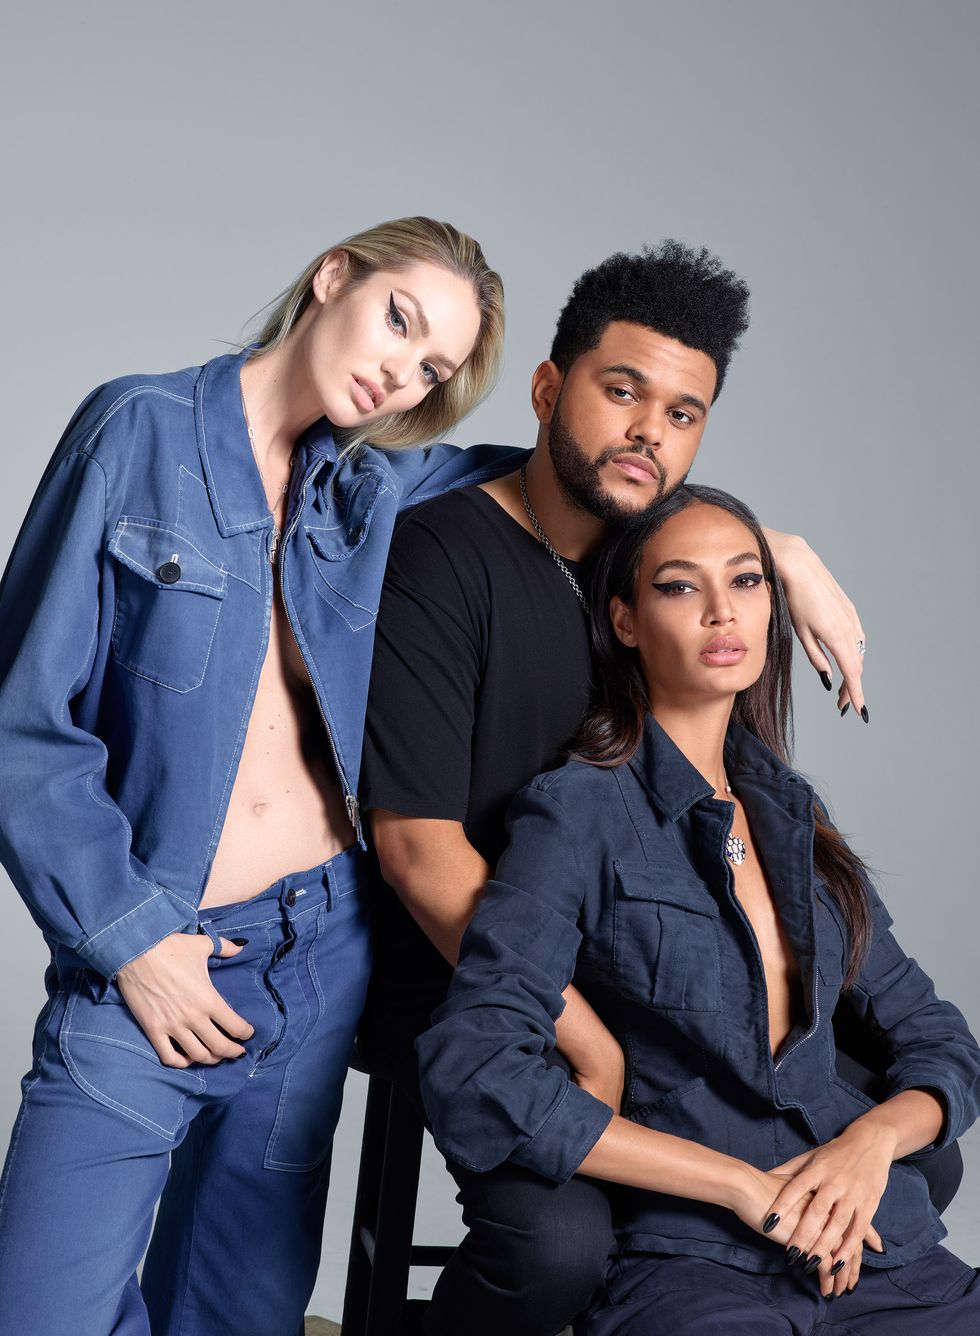 Candice Swanepoel, The Weeknd and Joan Smalls